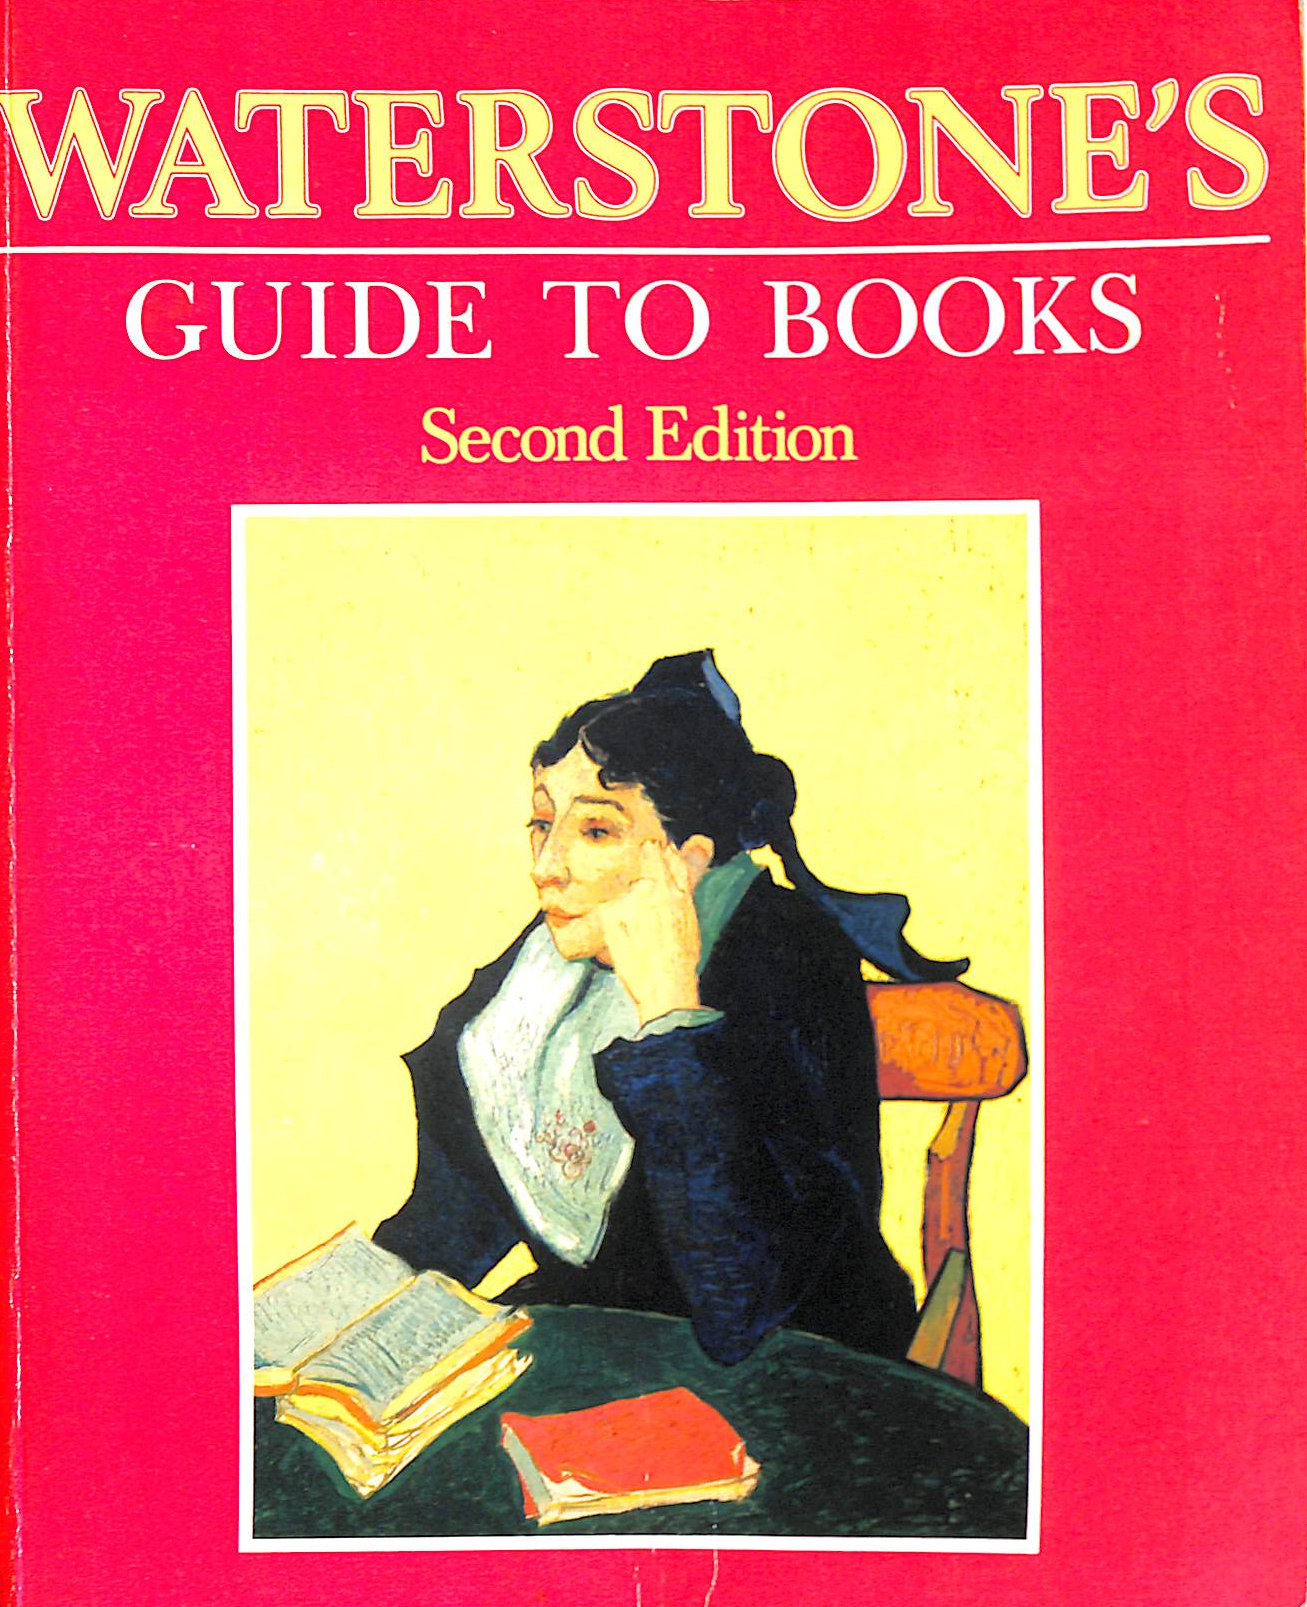 WATERSTONE CO - Waterstones Guide to Books - Second Edition